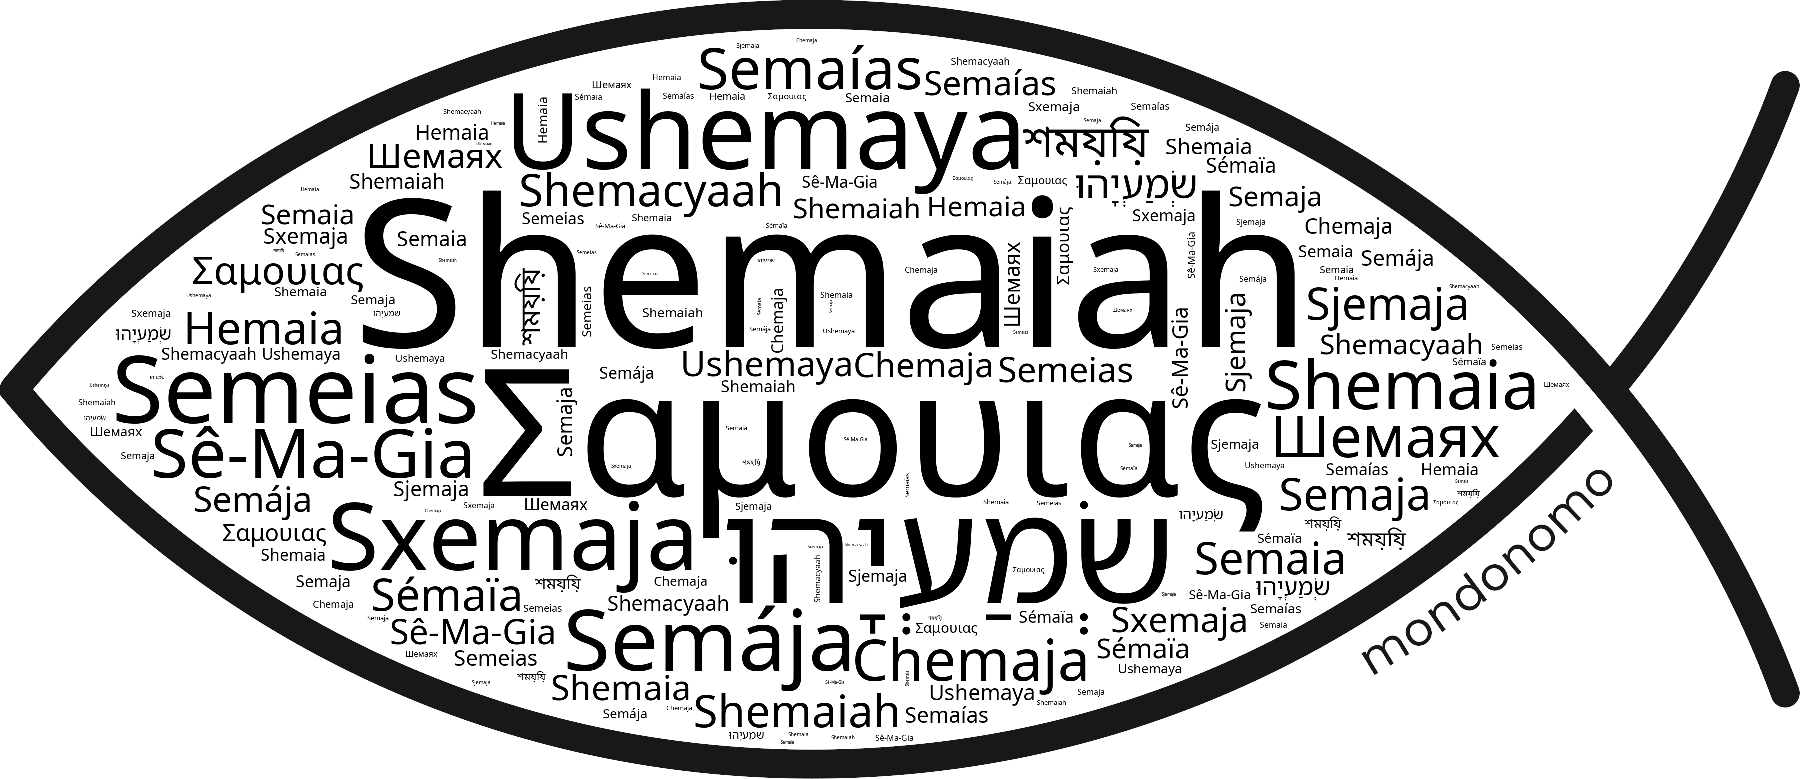 Name Shemaiah in the world's Bibles